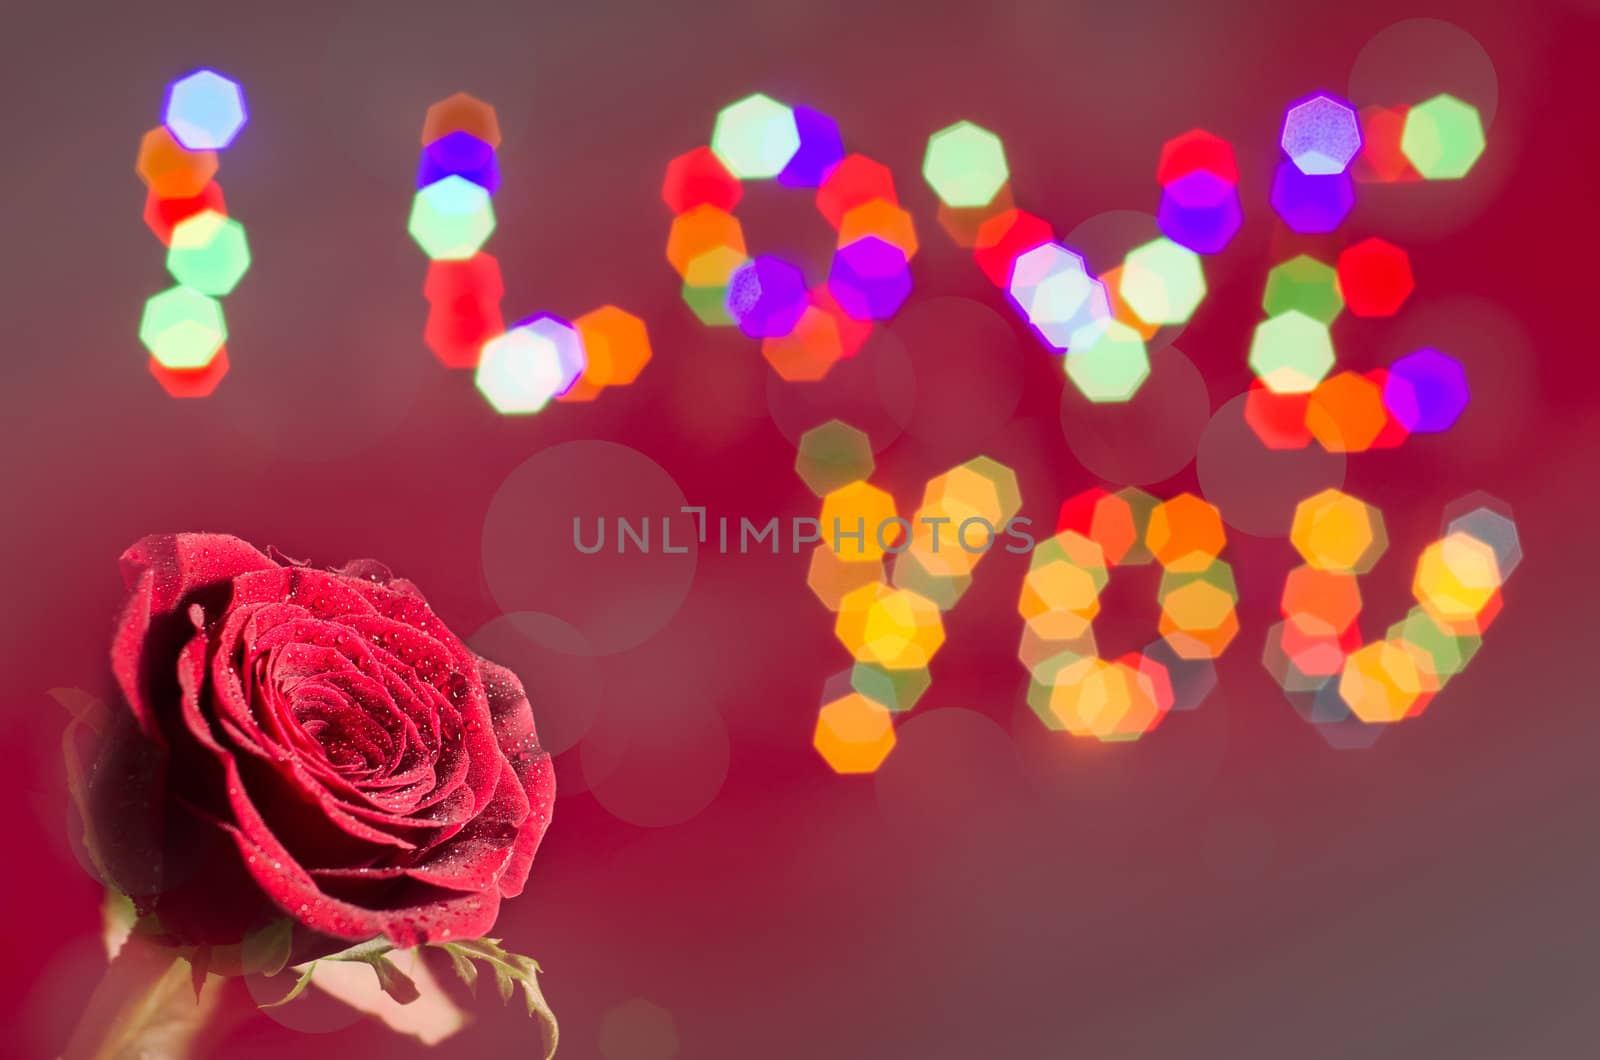 Valentine's image of a rose with a message I LOVE YOU in bokeh lights background